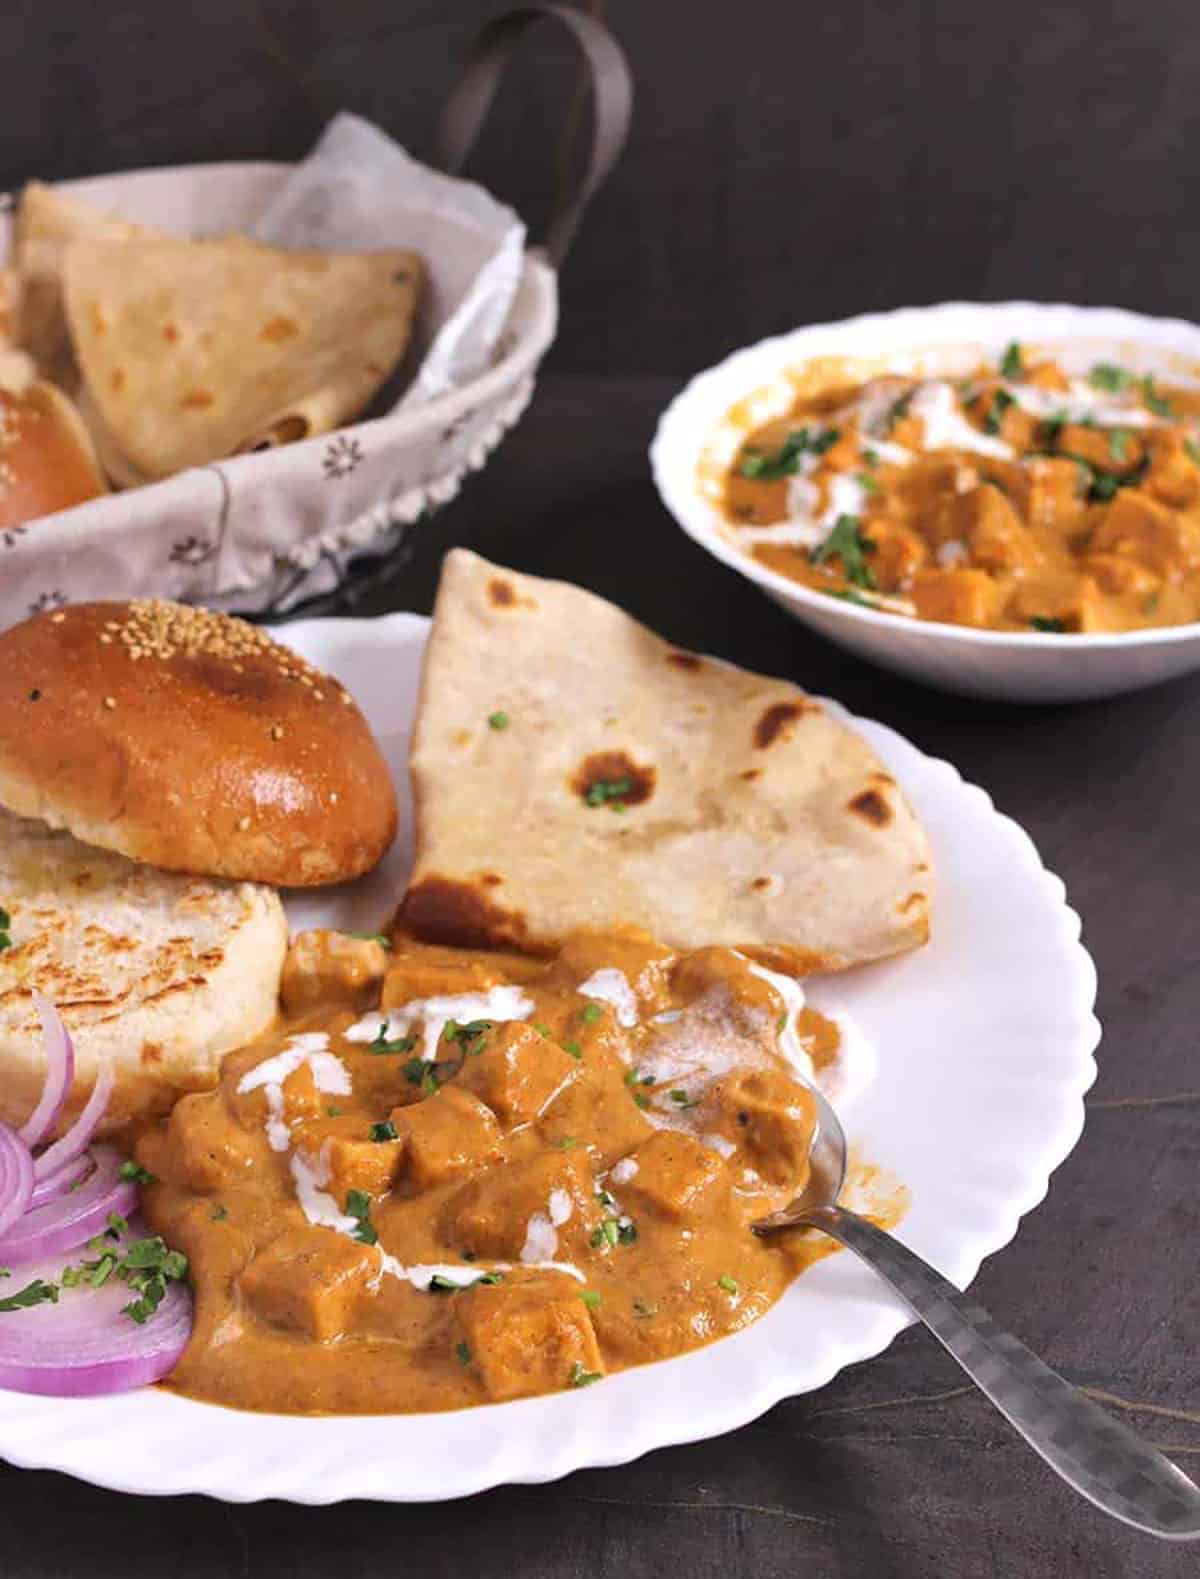 Butter paneer, toasted buns, chapati, and onion rings served in a plate. Butter paneer is garnished with cilantro and few spashes of cream. Background consists of a bread basket and serving bowl containing butter paneer.